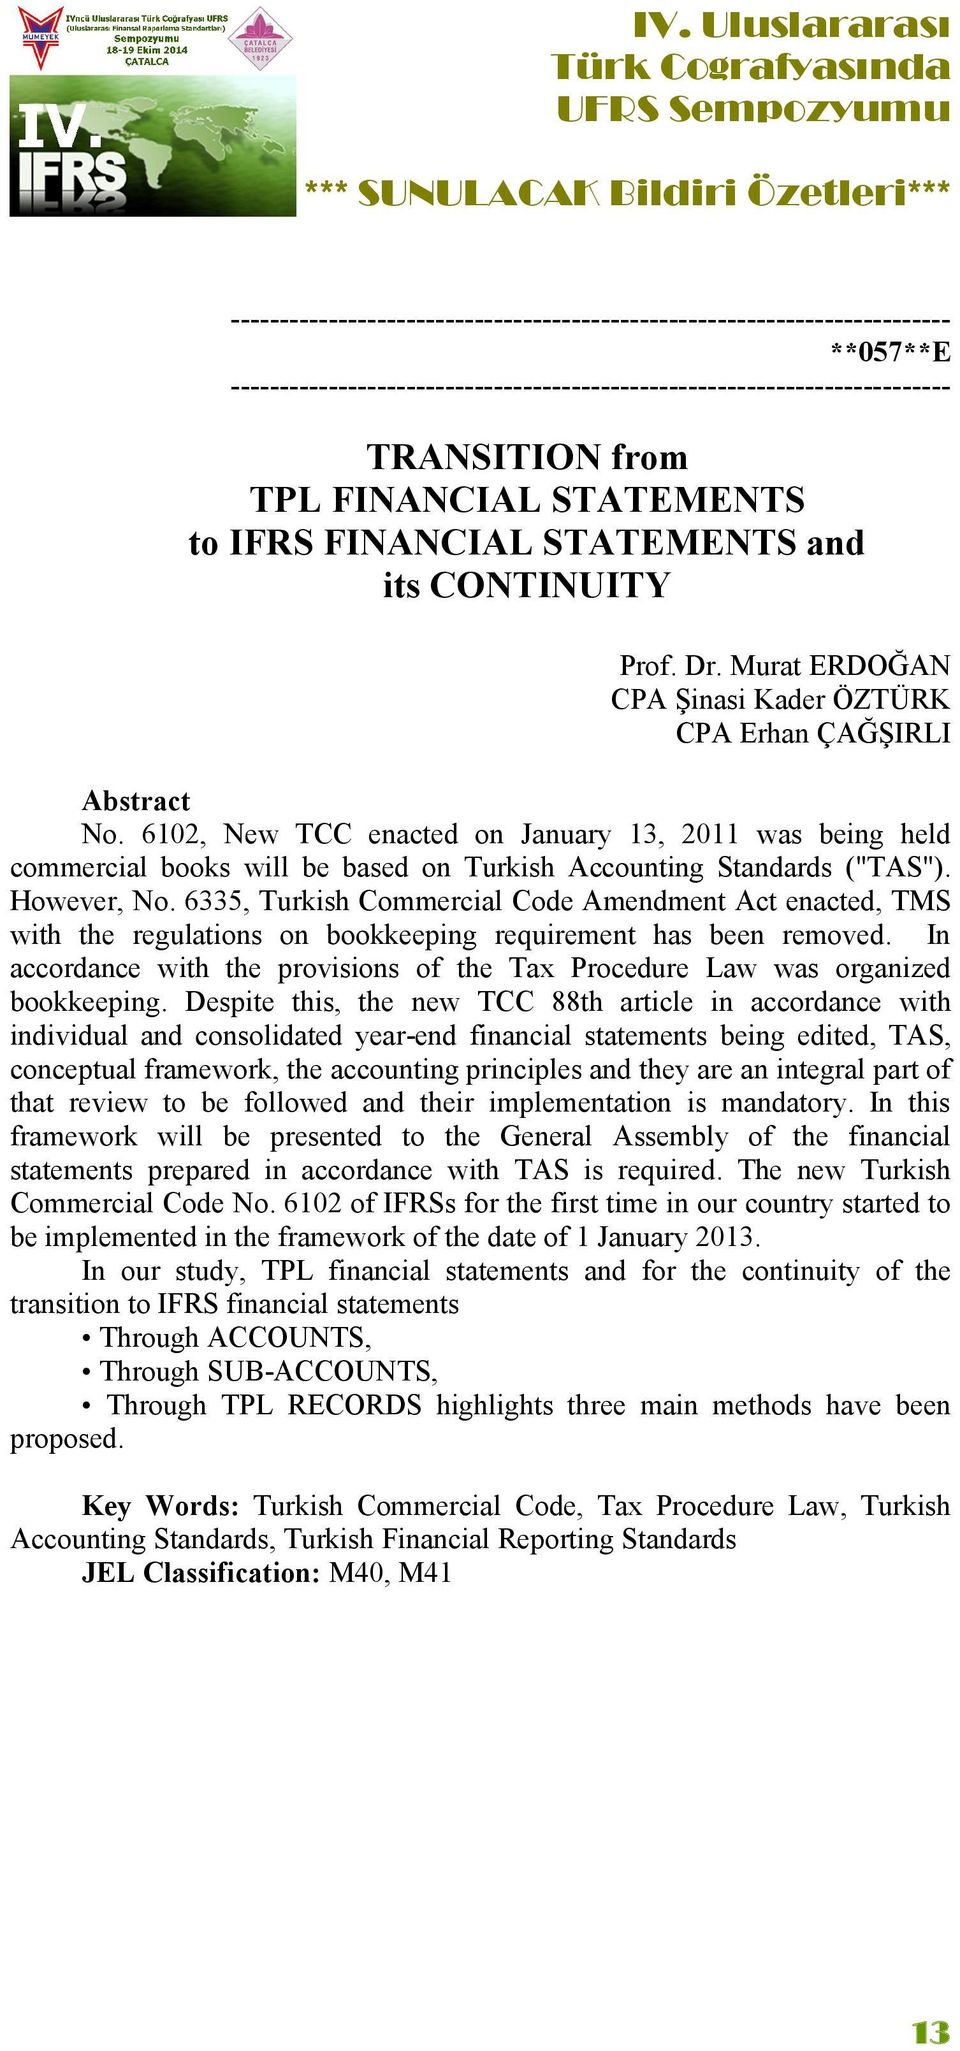 6335, Turkish Commercial Code Amendment Act enacted, TMS with the regulations on bookkeeping requirement has been removed.